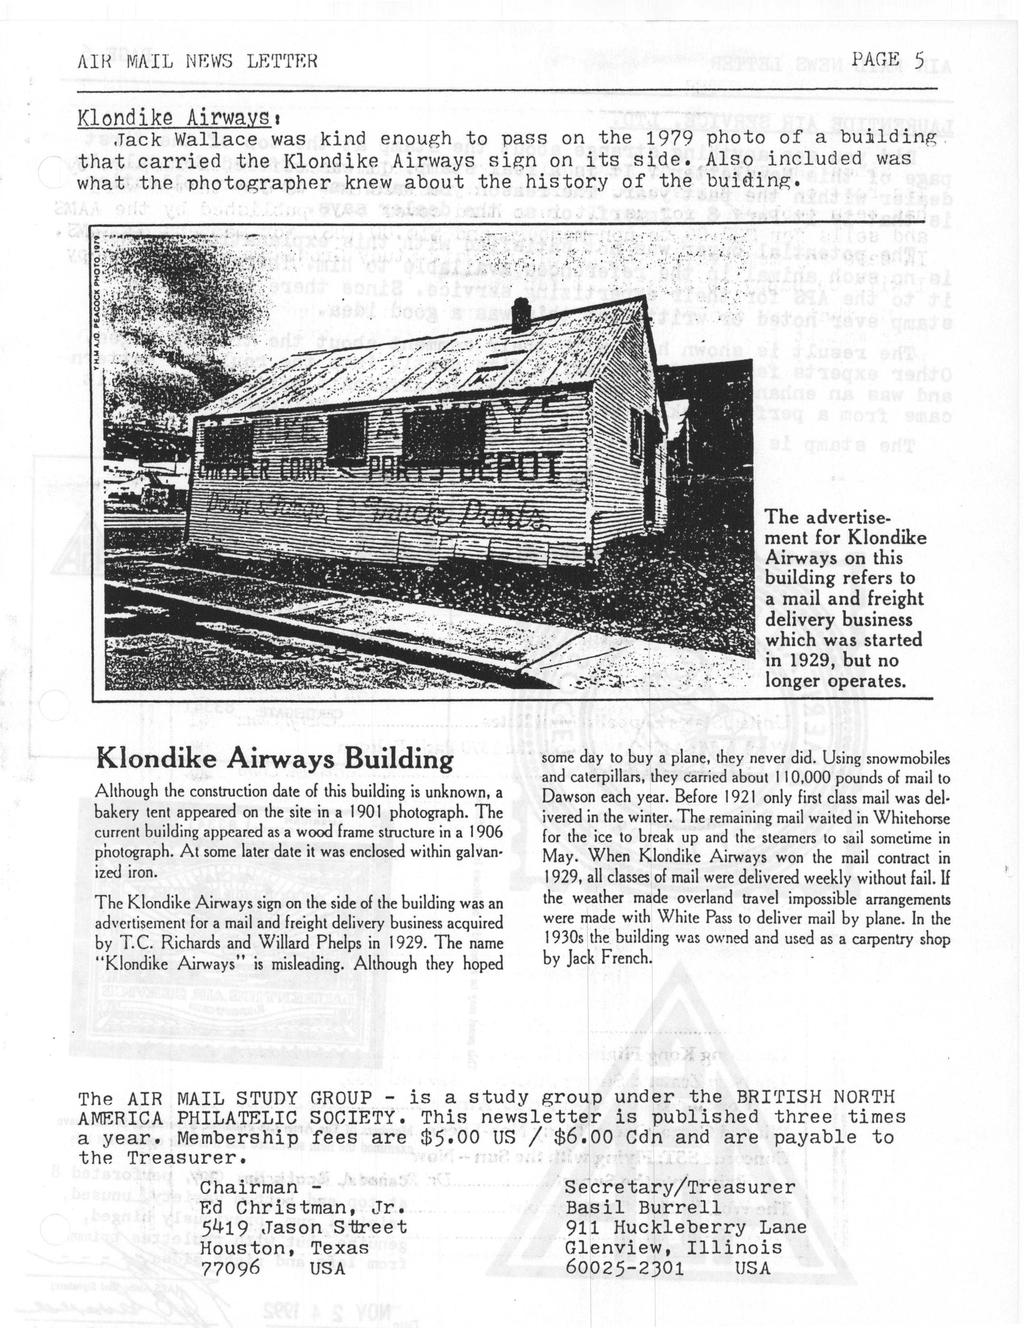 AIR MAIL NEWS LETTER PAGE 5 Klondike Airwayst Jack Wallace was kind enough to pass on the 1979 photo of a building that carried the Klondike Airways sign on its side.